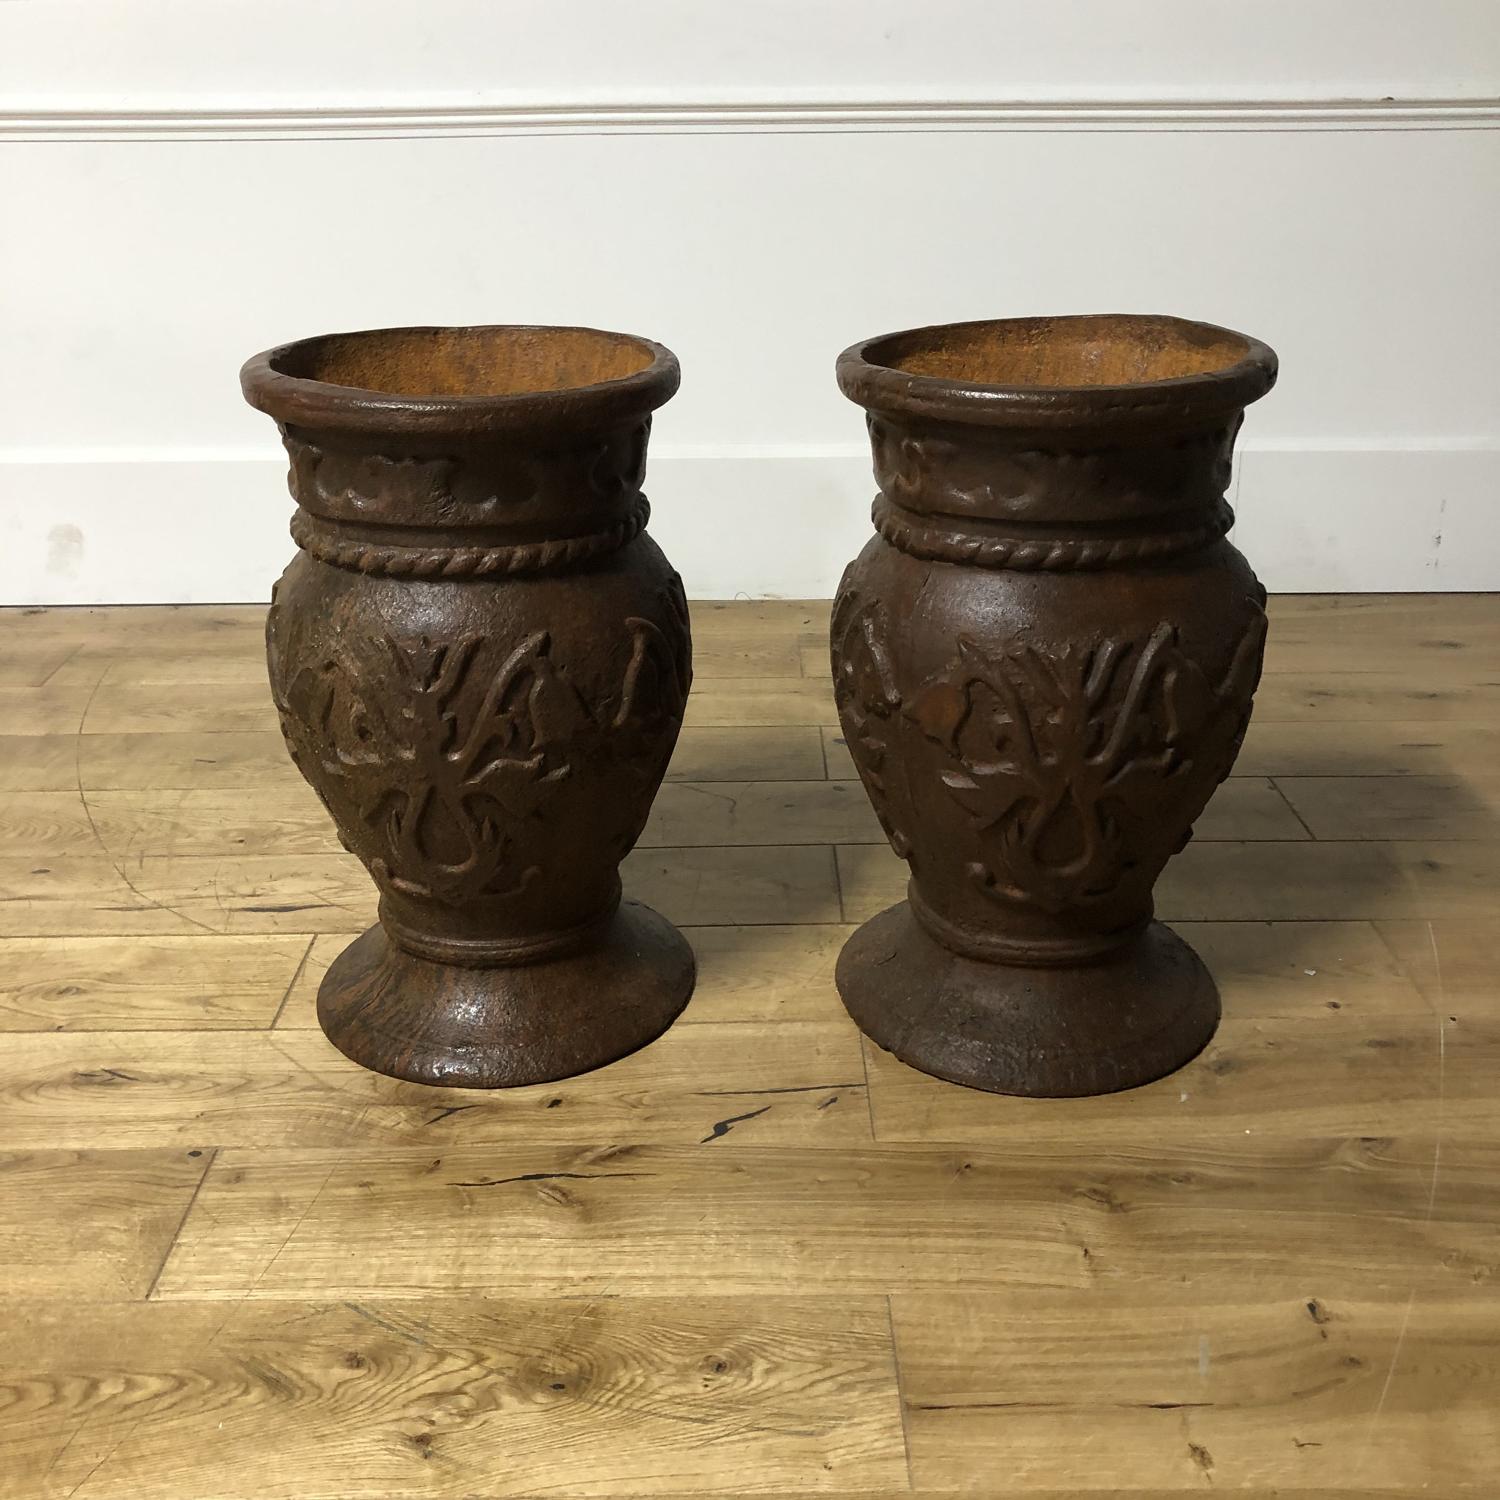 A pair of large urns